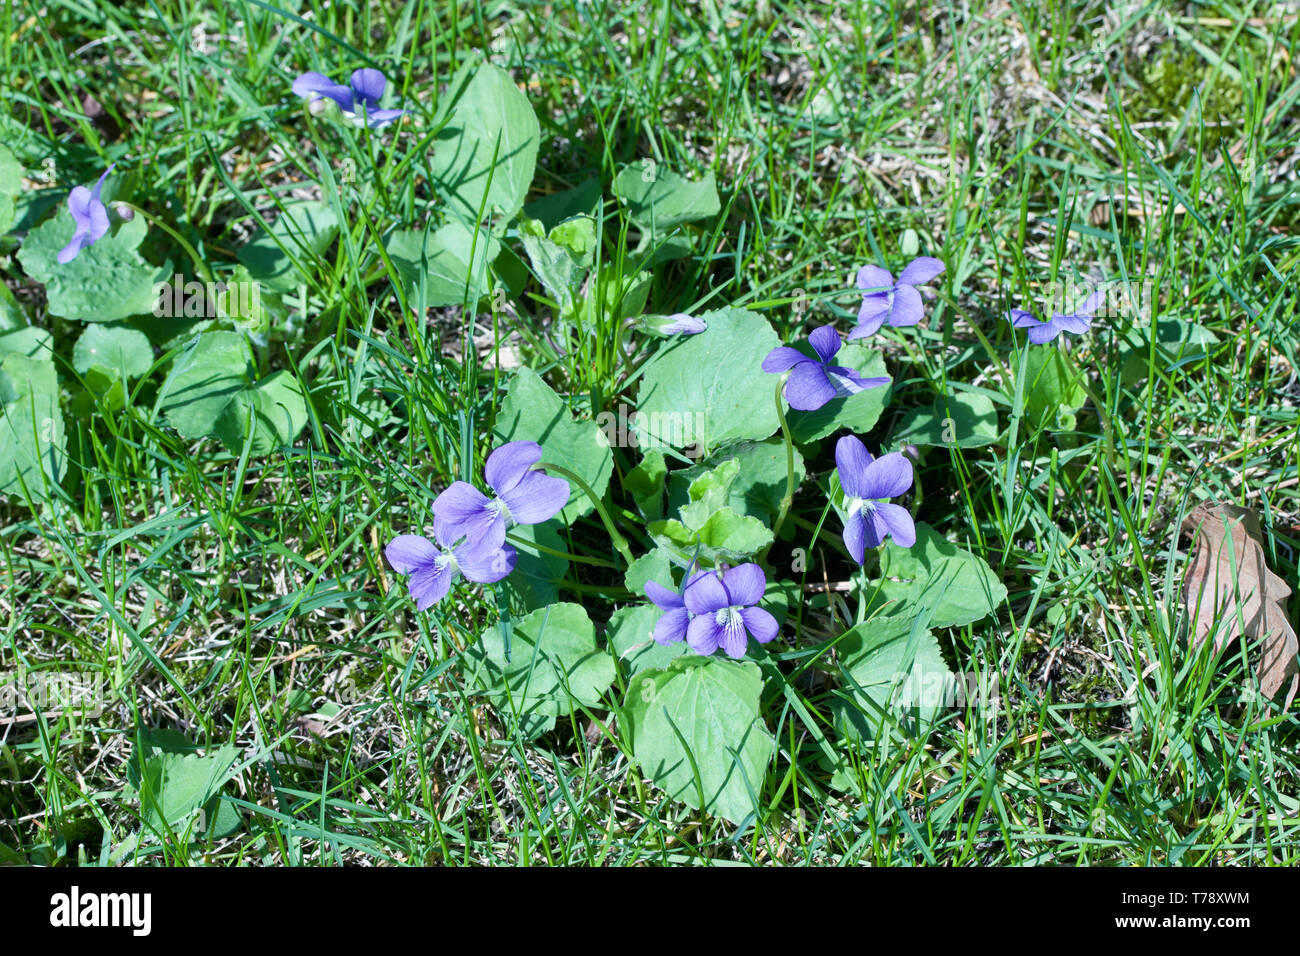 Close up view of common blue violet wildflowers (viola sororia) growing naturally in their uncultivated woodland prairie environment Stock Photo